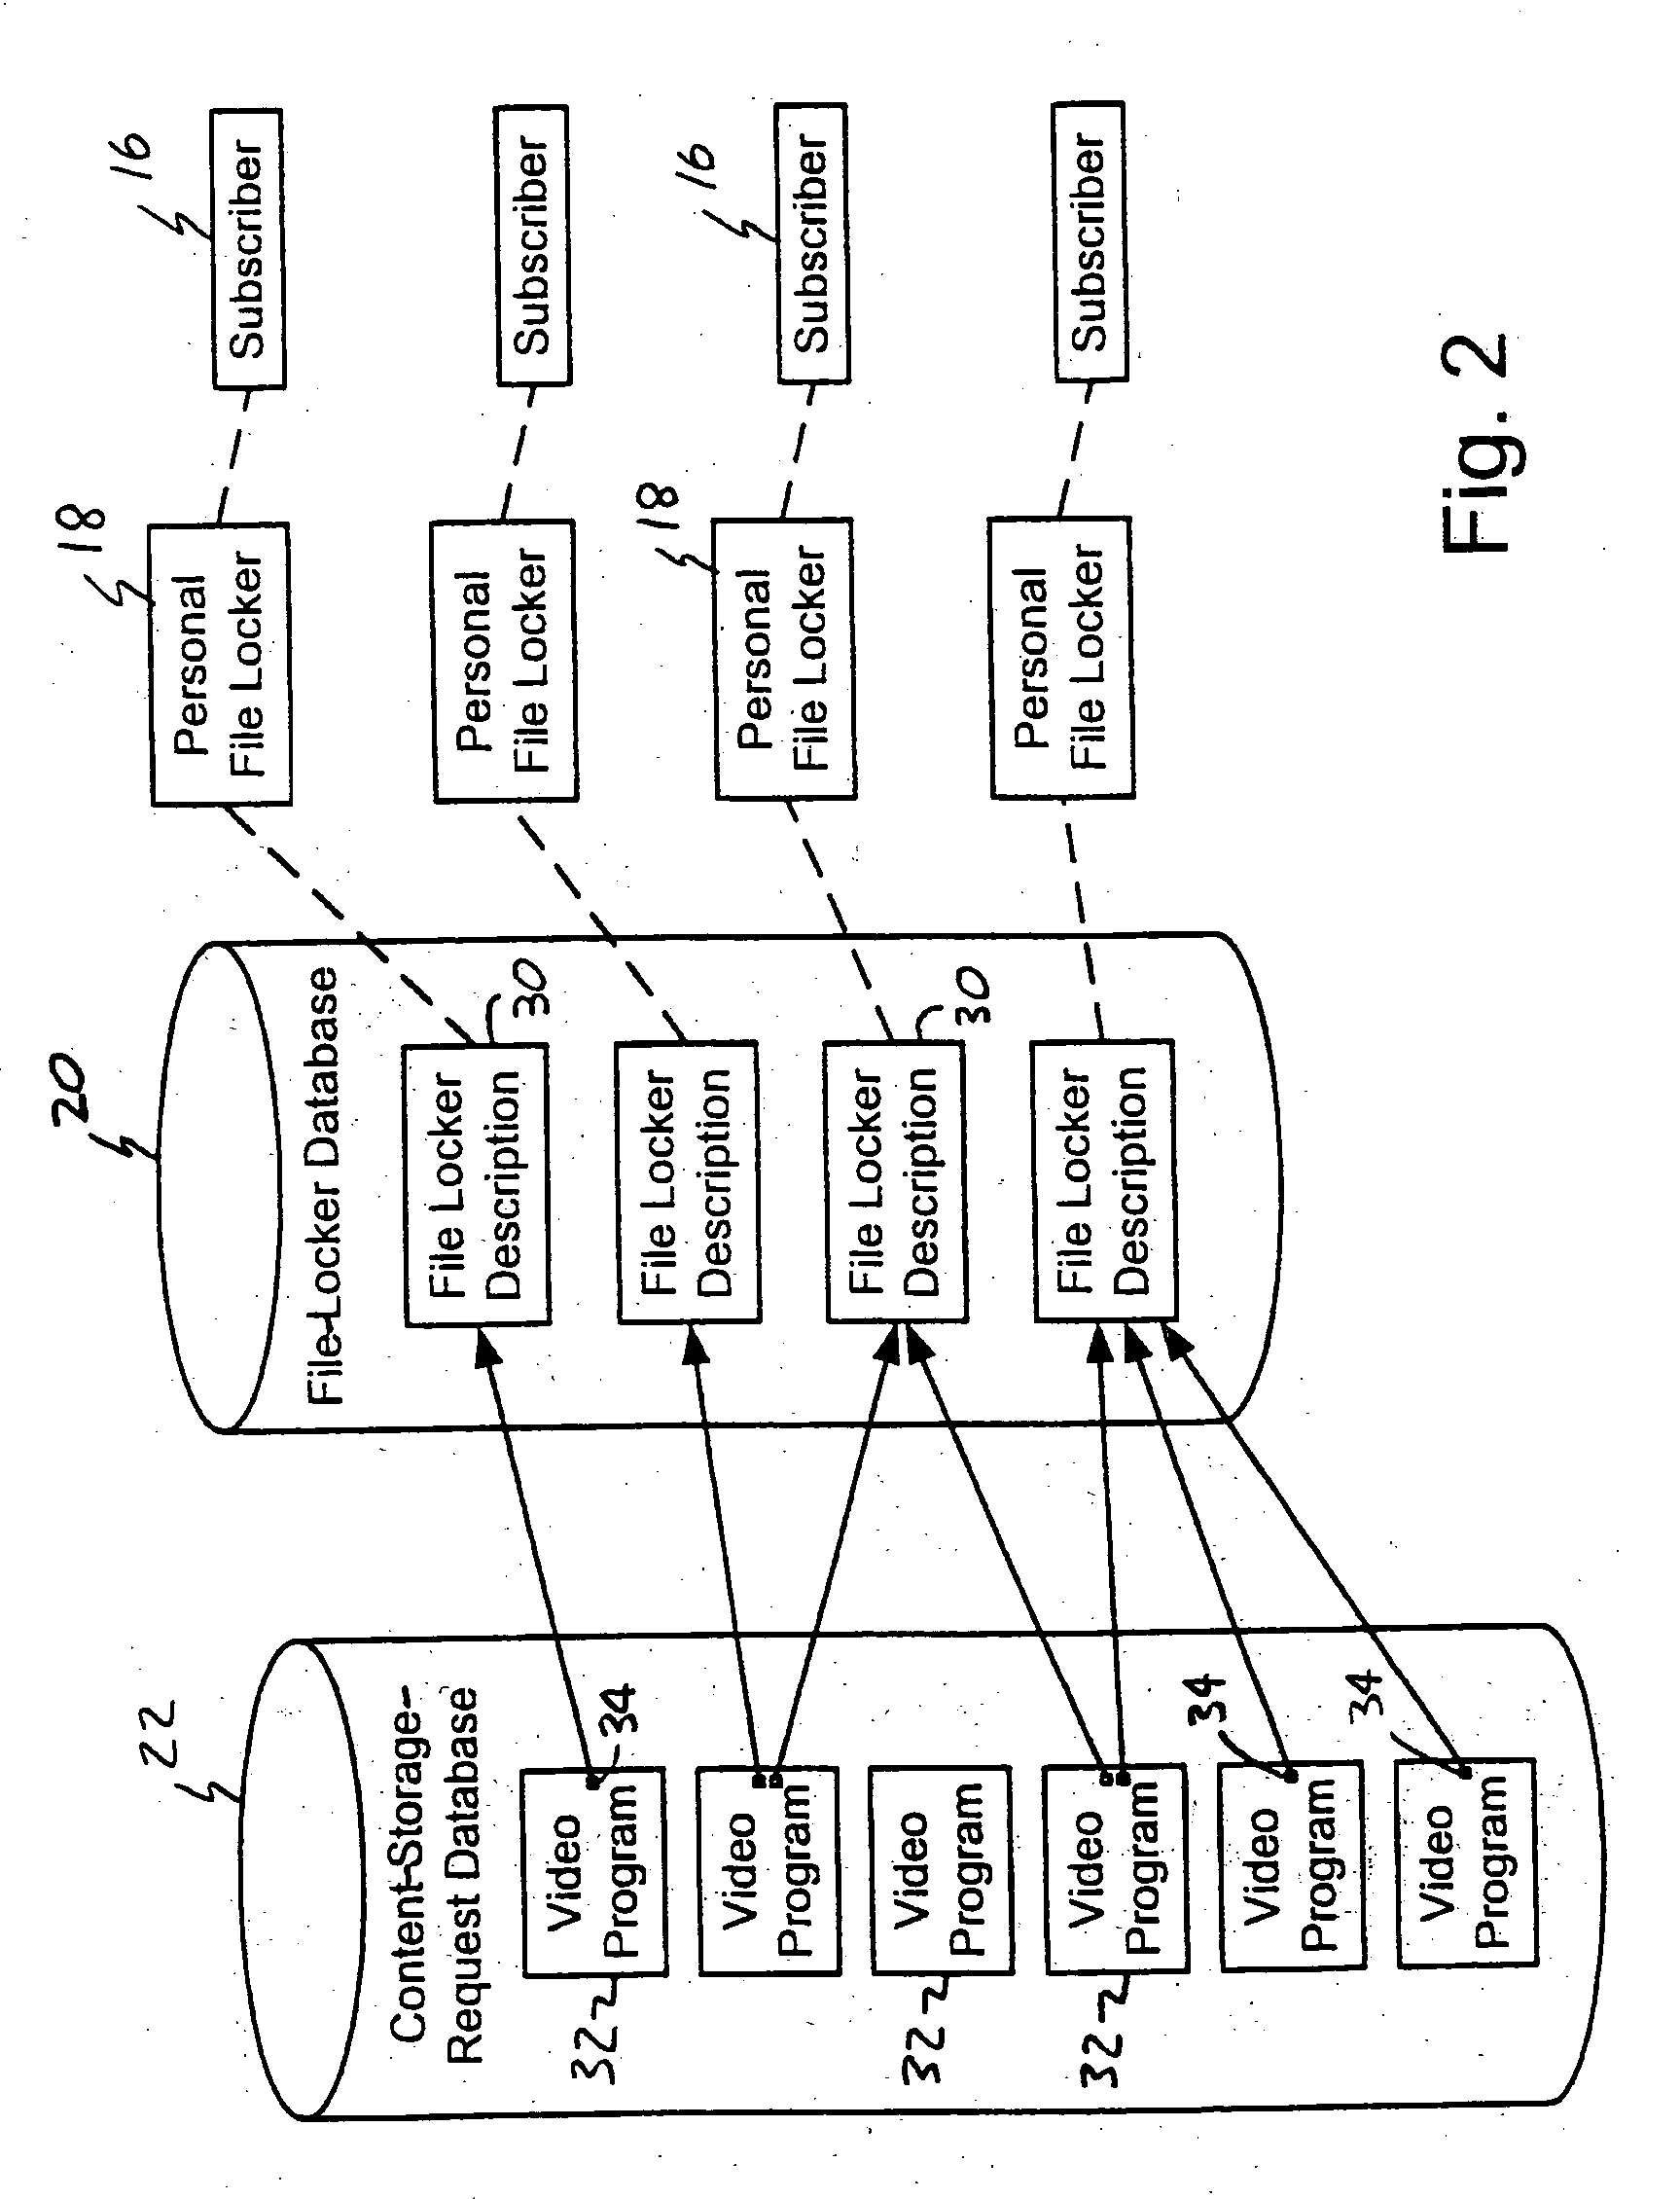 Content storage method and system